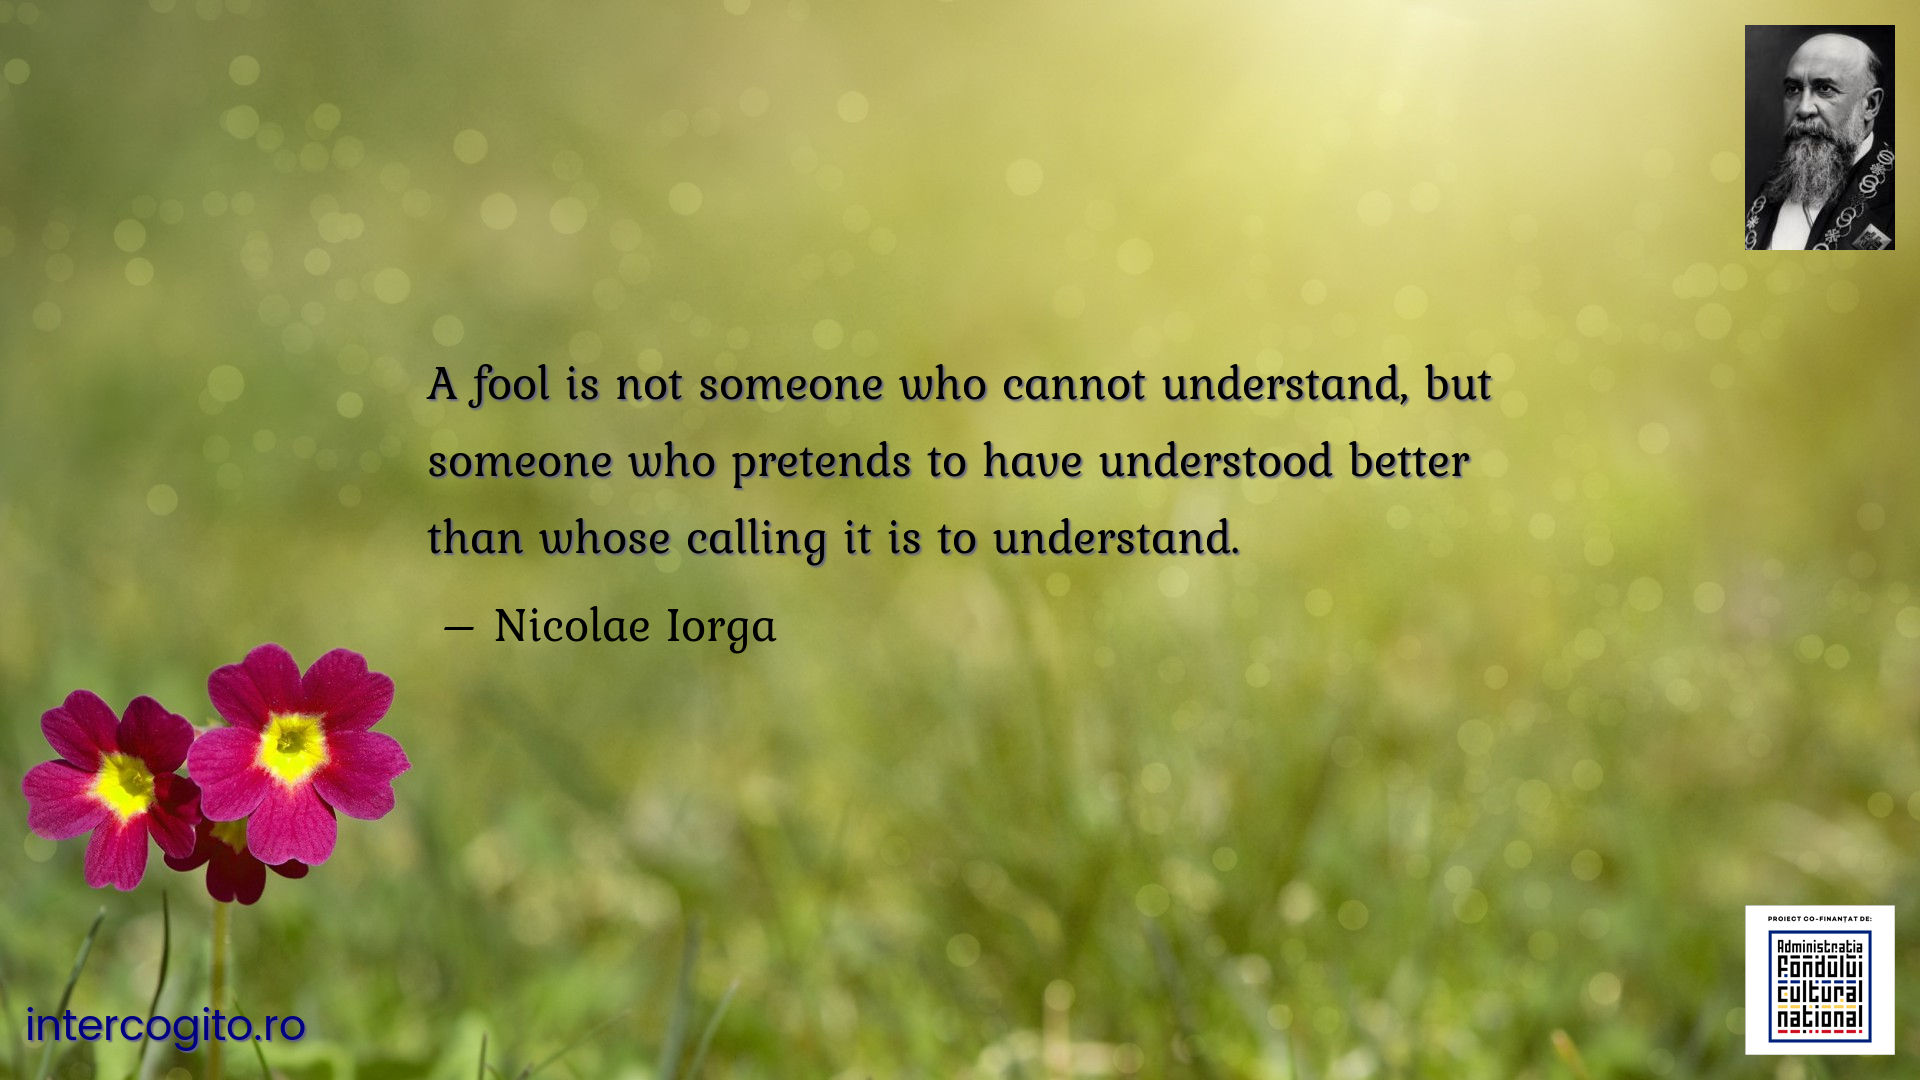 A fool is not someone who cannot understand, but someone who pretends to have understood better than whose calling it is to understand.